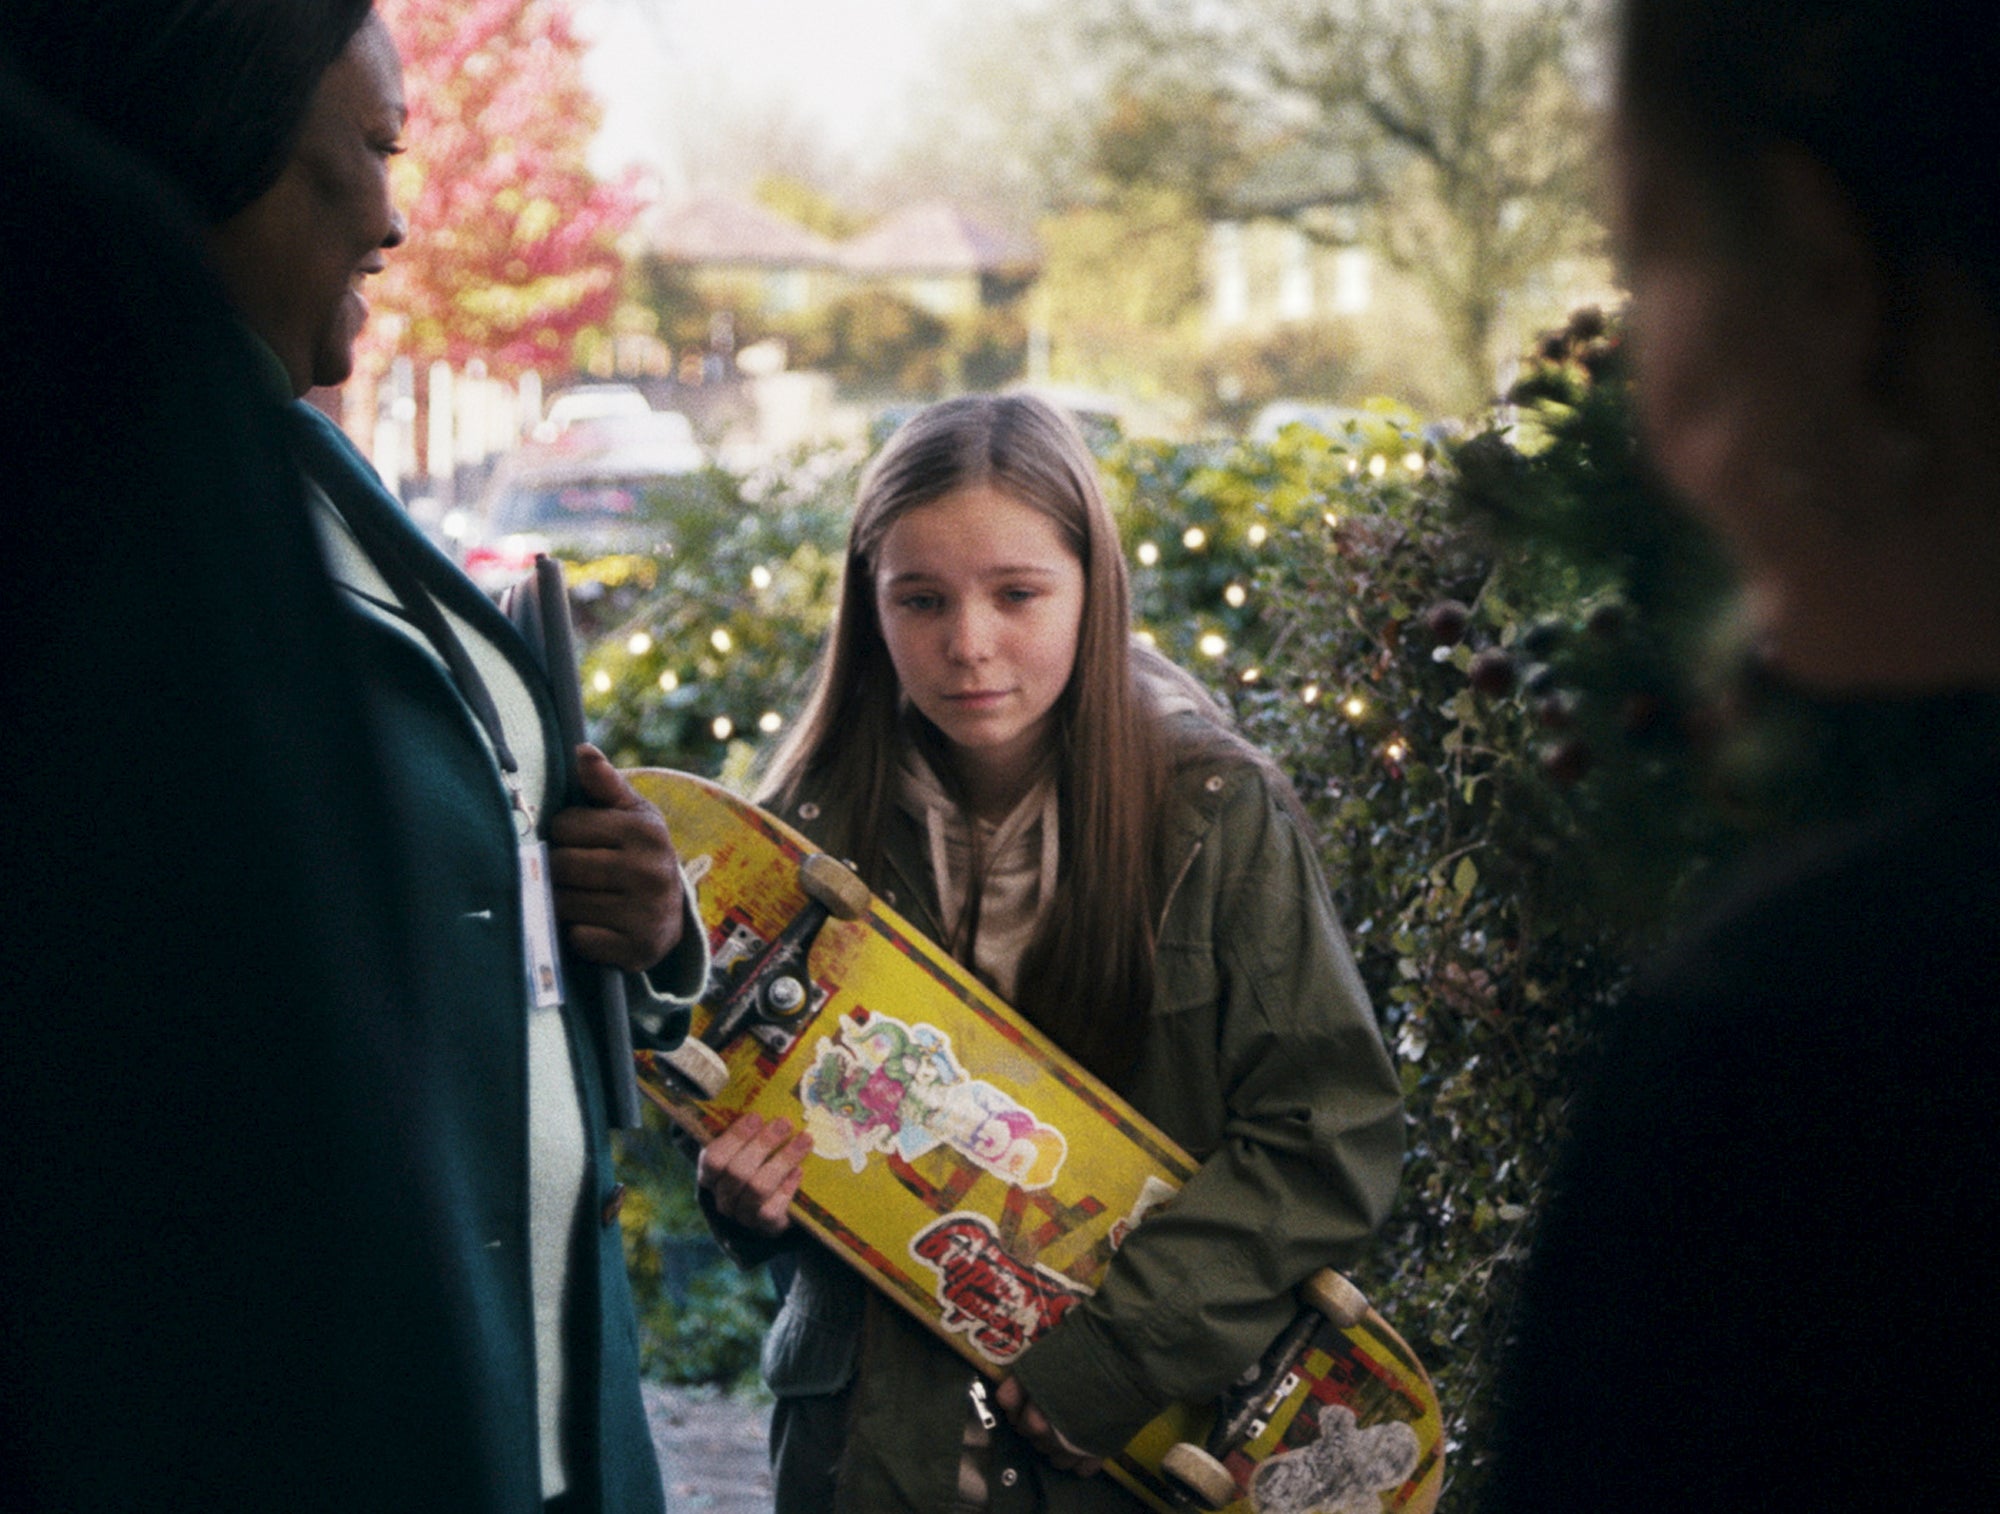 Hoorah for the John Lewis Christmas ad. At last, the spotlight is on kids in care